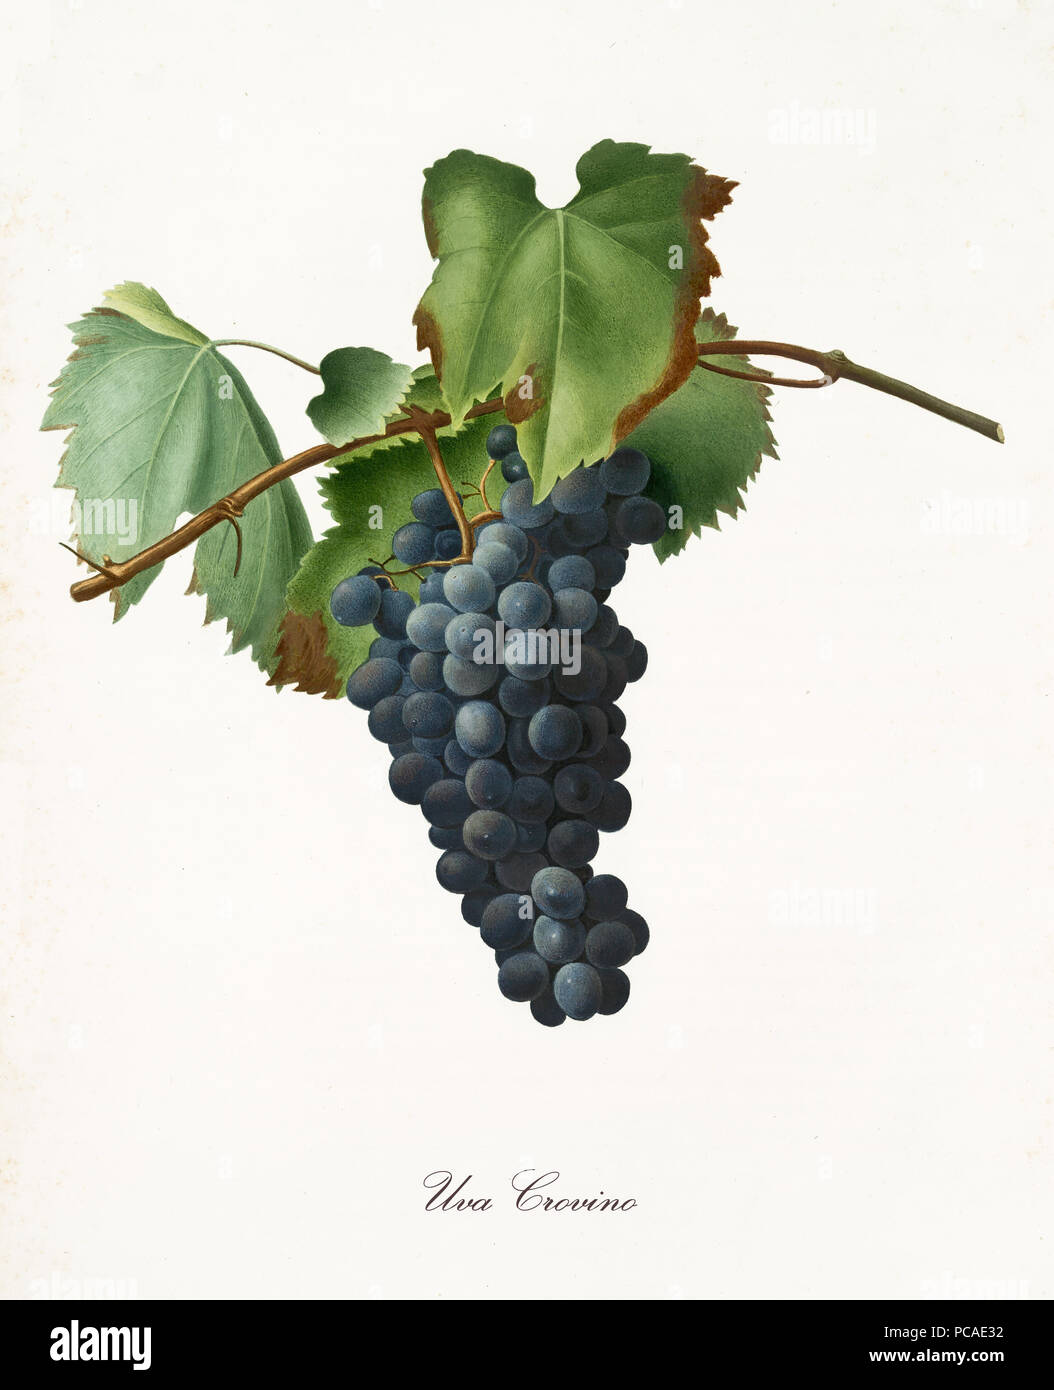 Black grape hanging from part of vine branch with leaves. All the elements are isolated over white background. Old detailed botanical illustration by Giorgio Gallesio published in 1817, 1839 Stock Photo